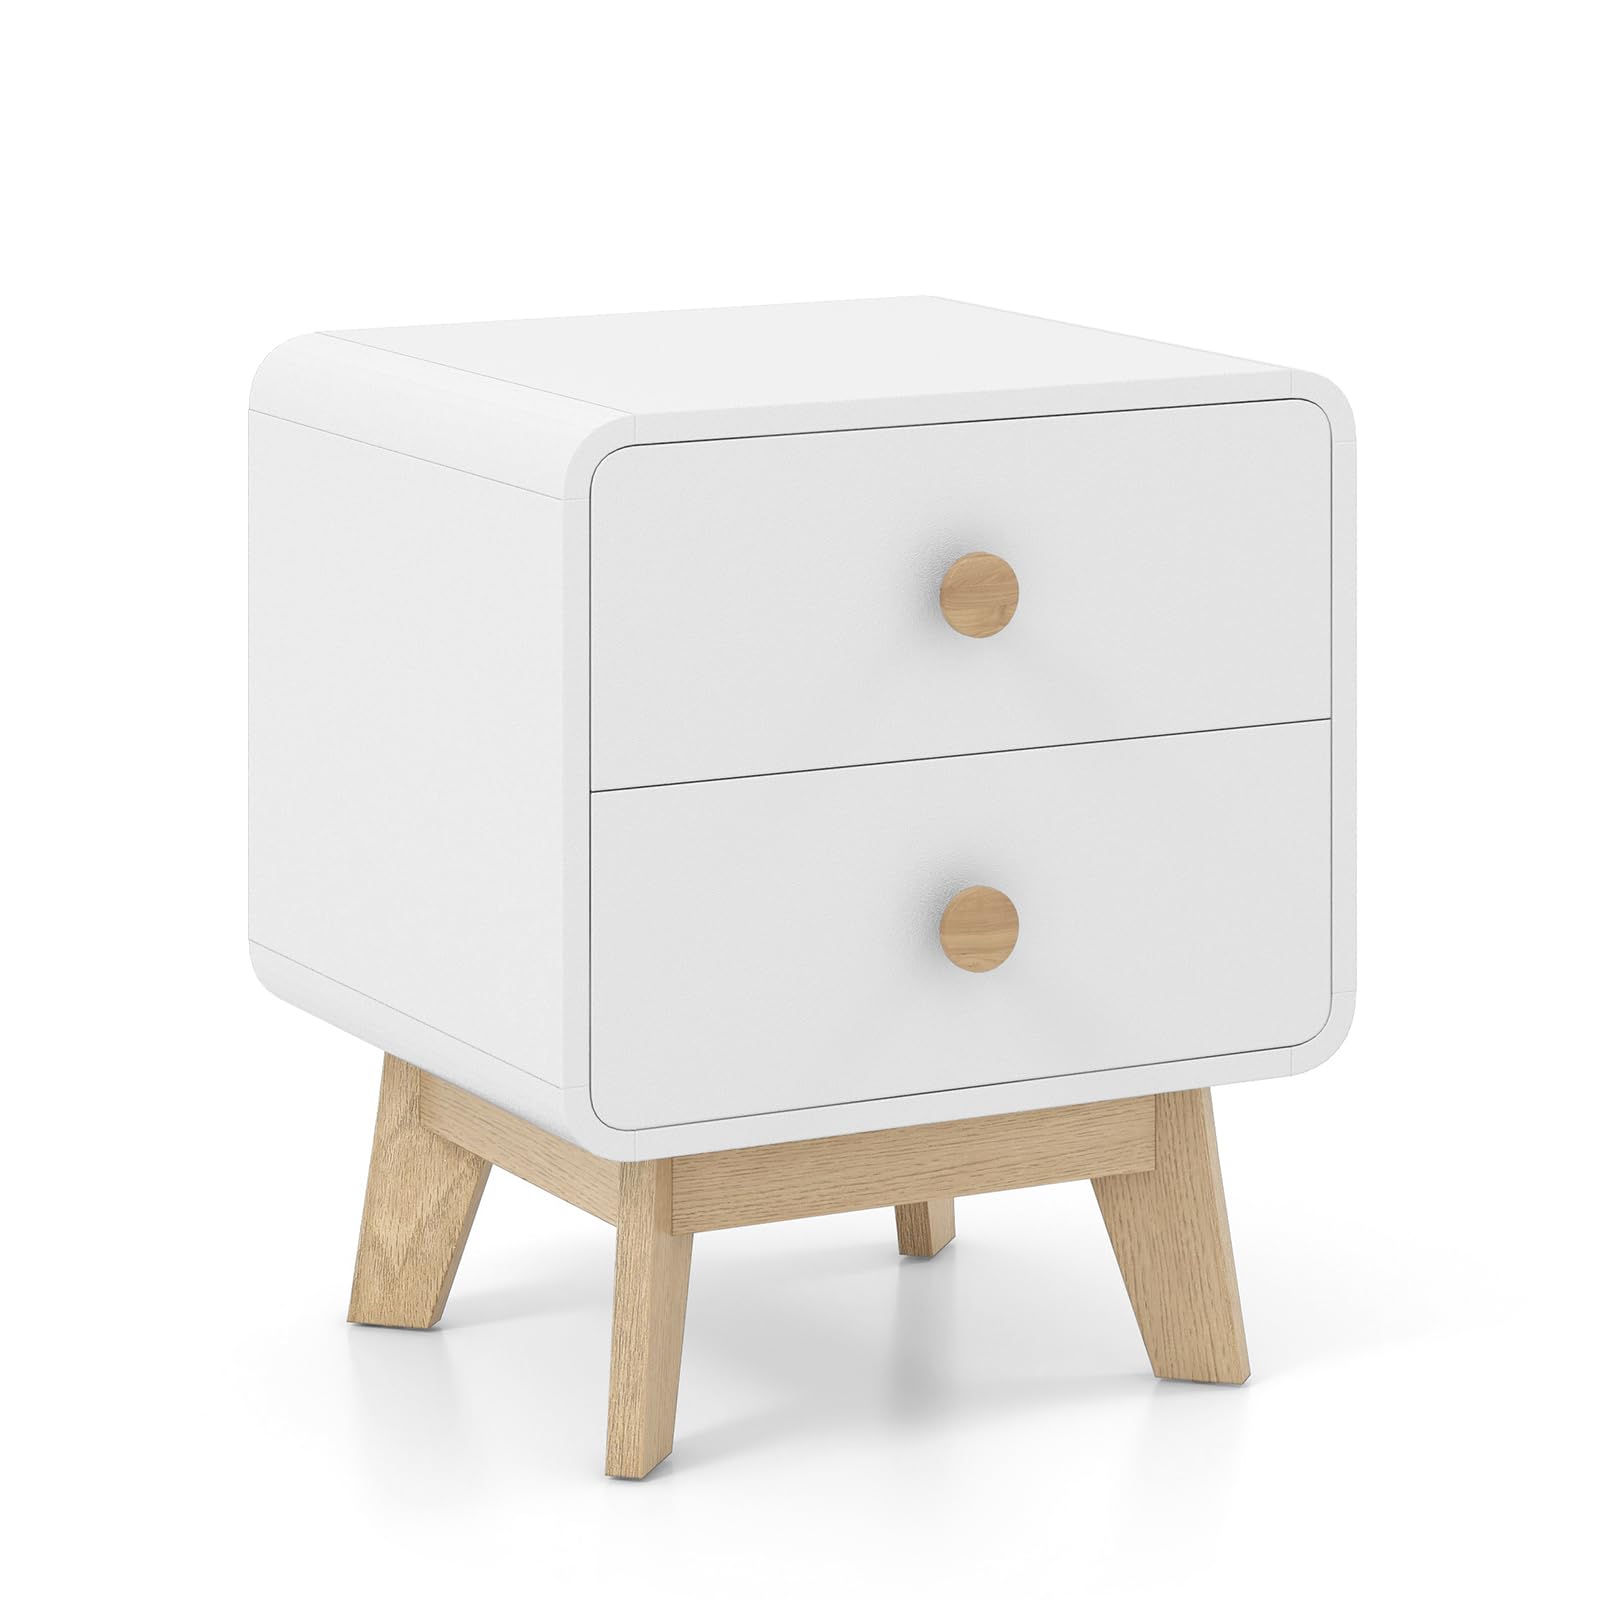 Giantex Night Stand with 2 Drawers, Mid Century Modern Bedside Table with Cute Round Knobs